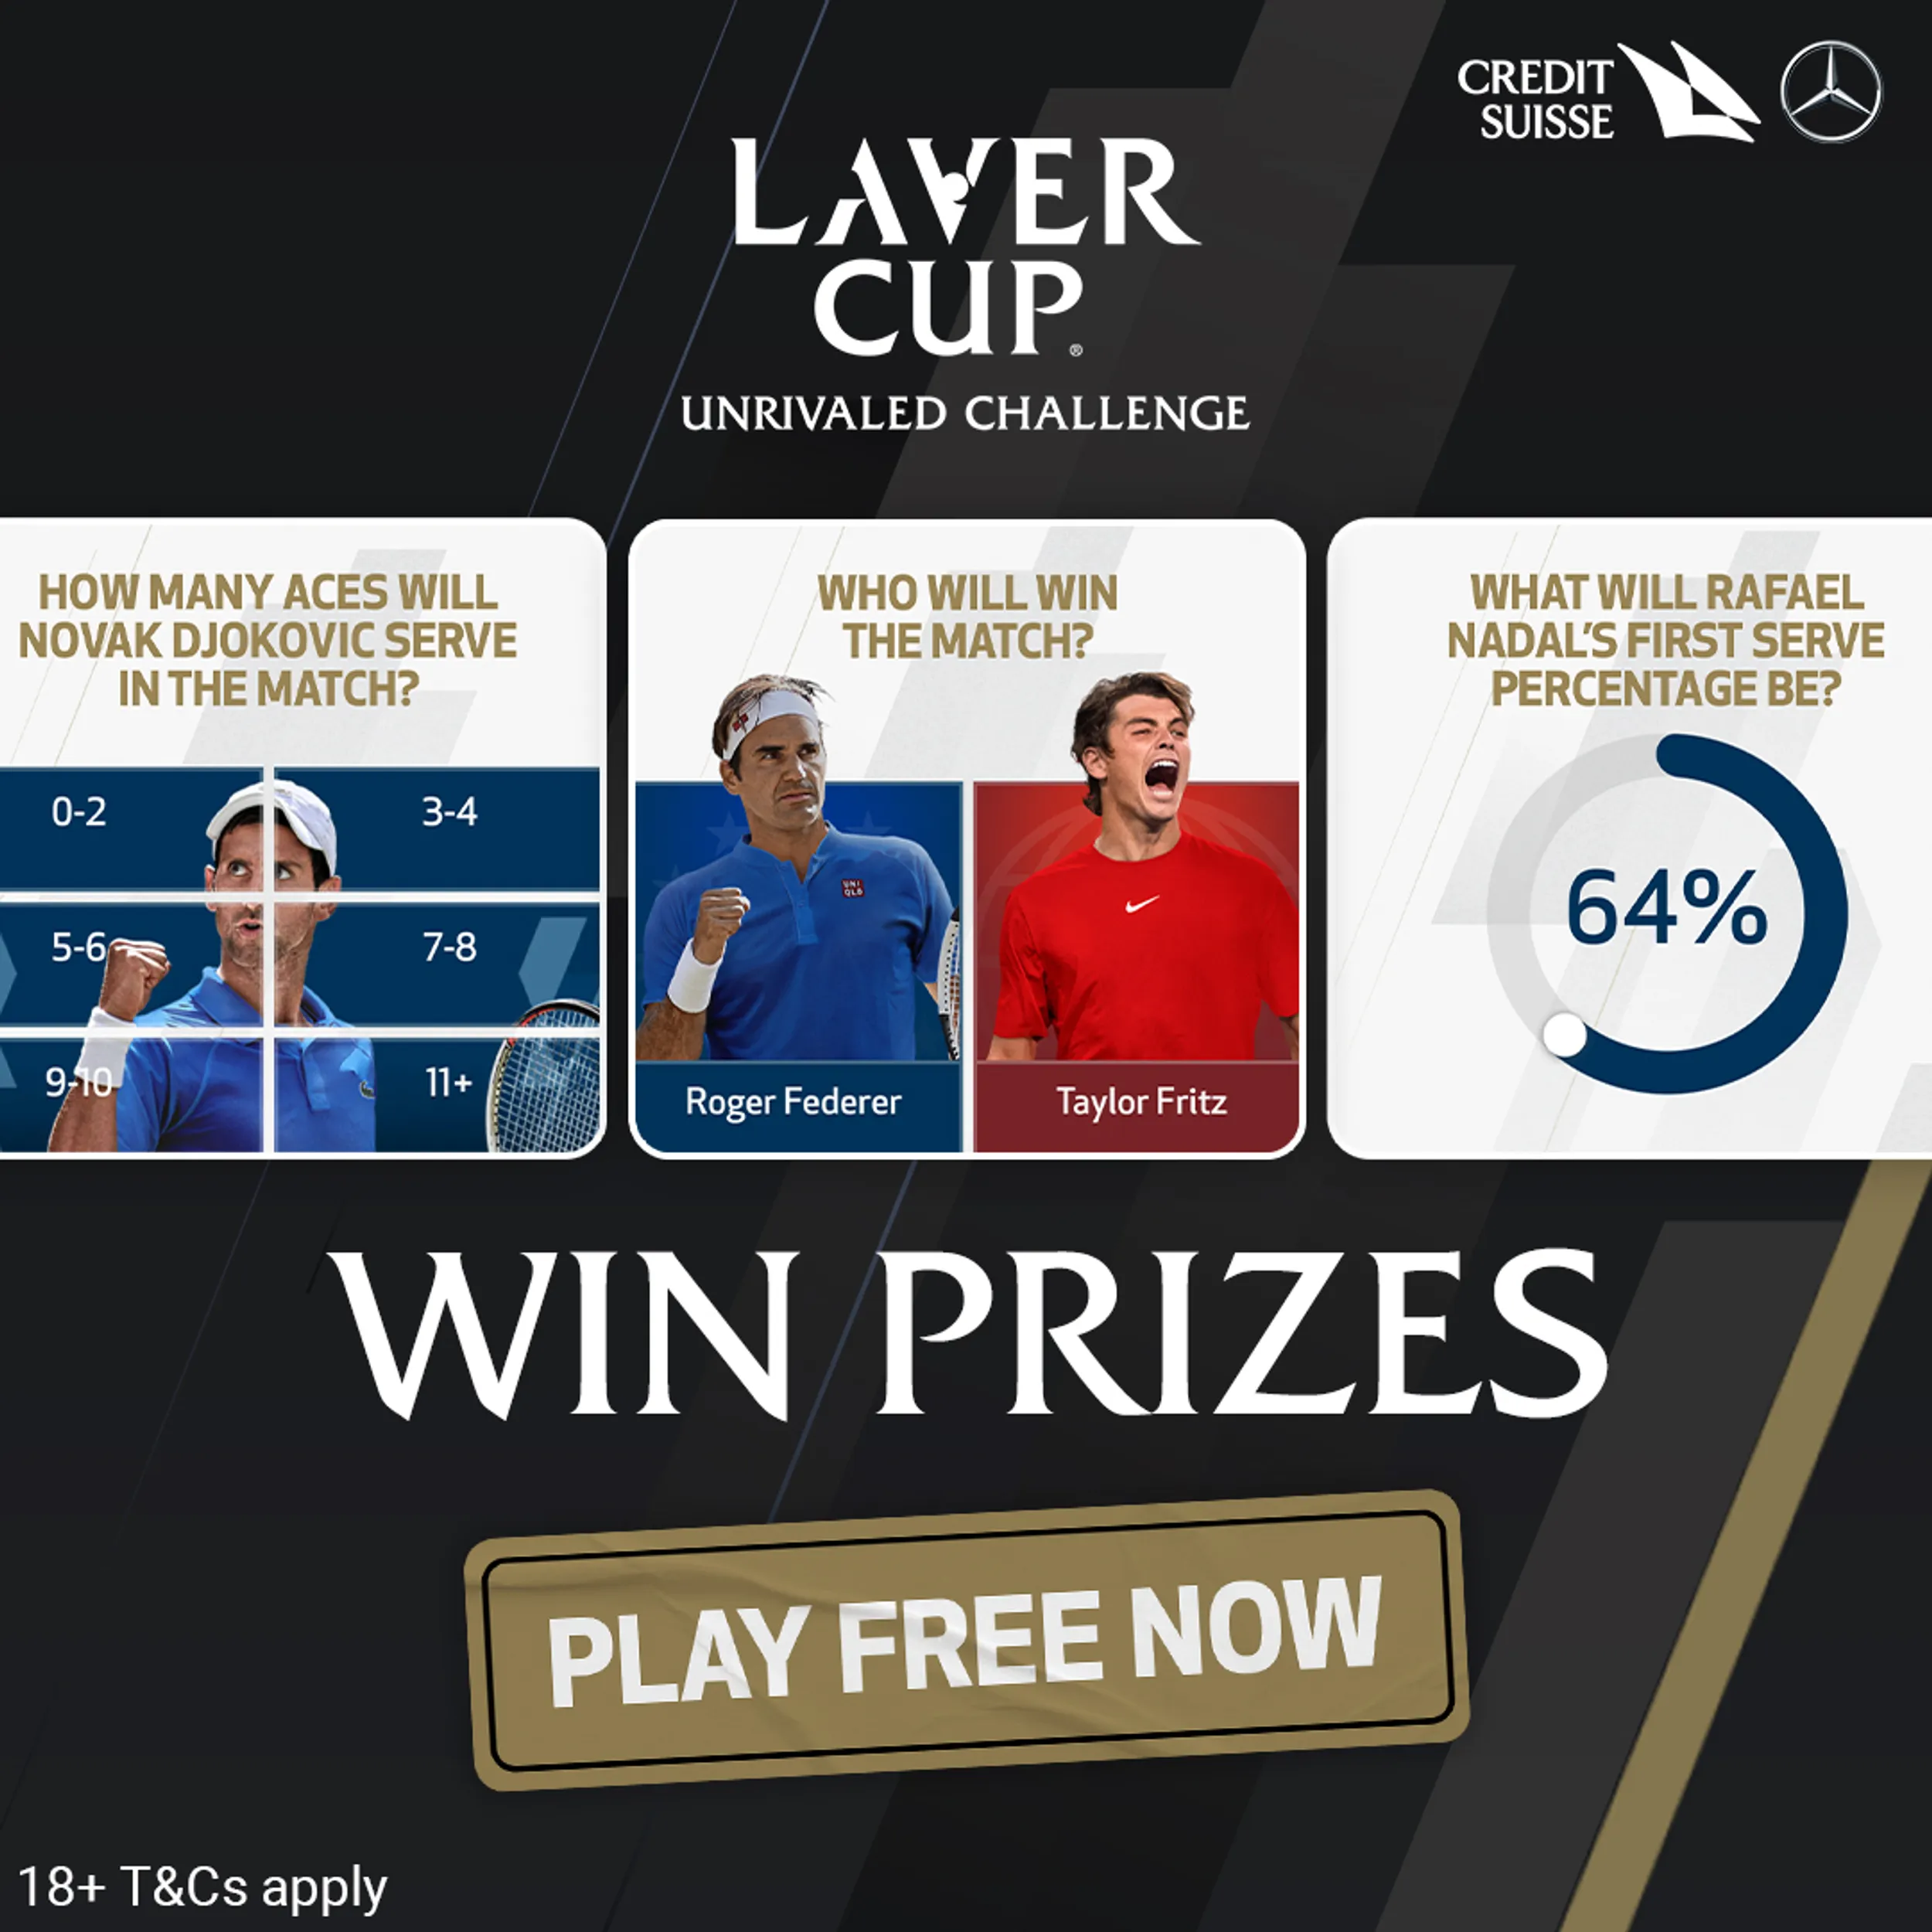 Laver Cup Carousel 4